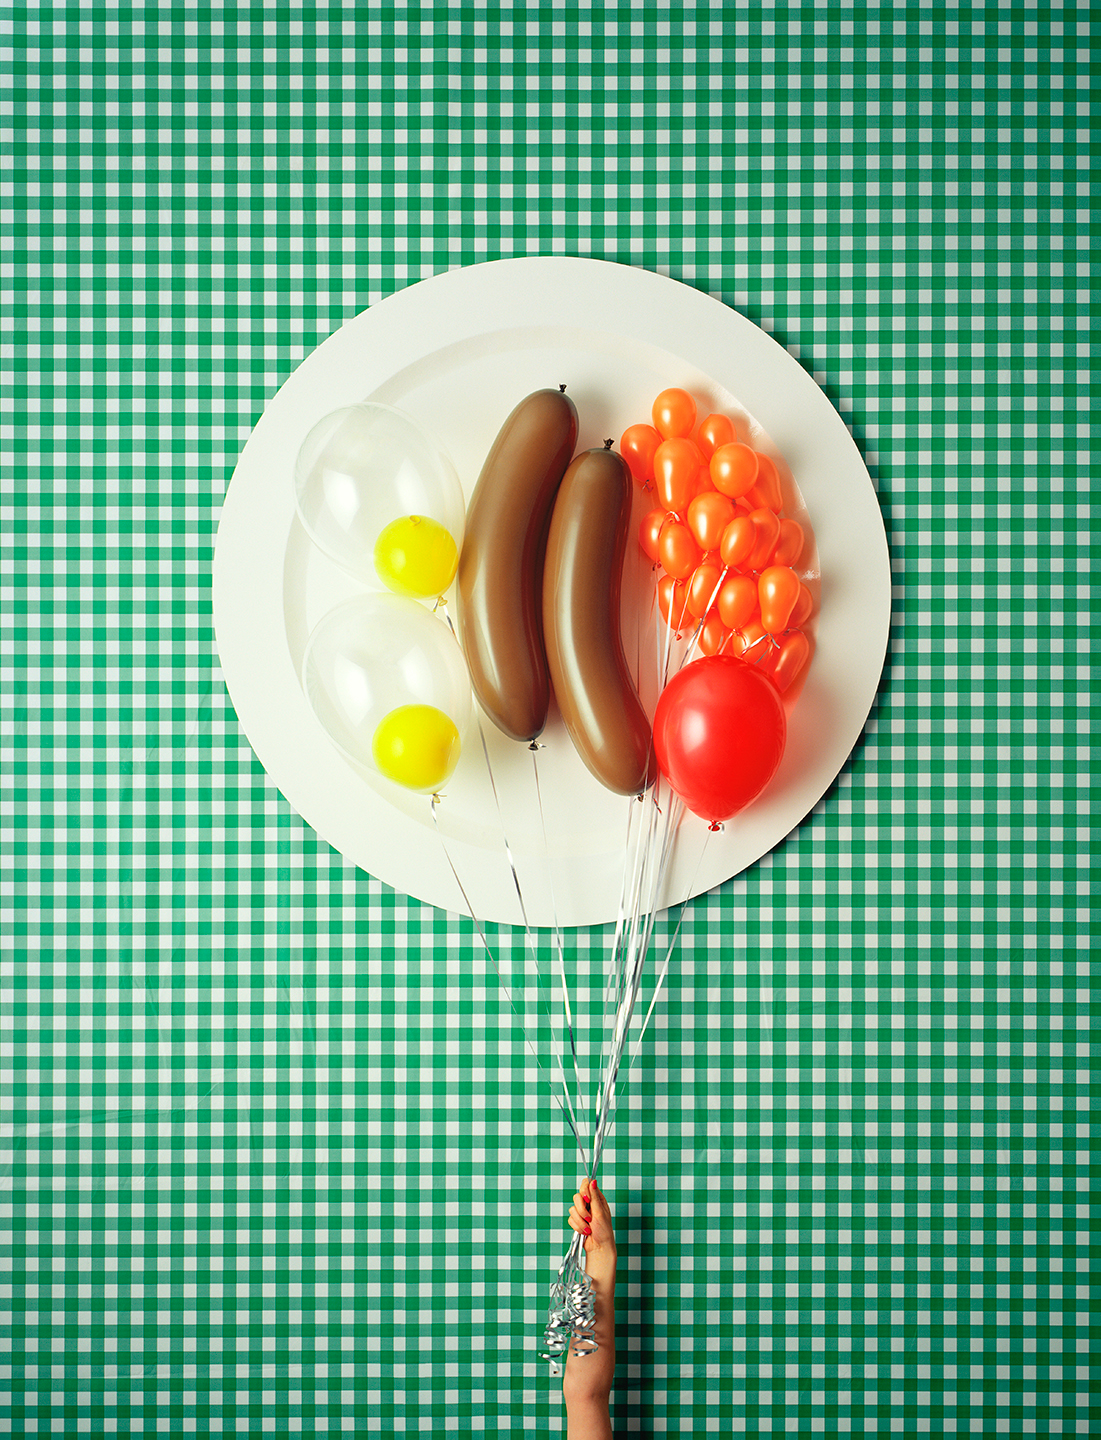 david sykes  Photography  Still life studio people balloons qr obsessions faux food skulls skullsicle Food  meat graphic colours still life